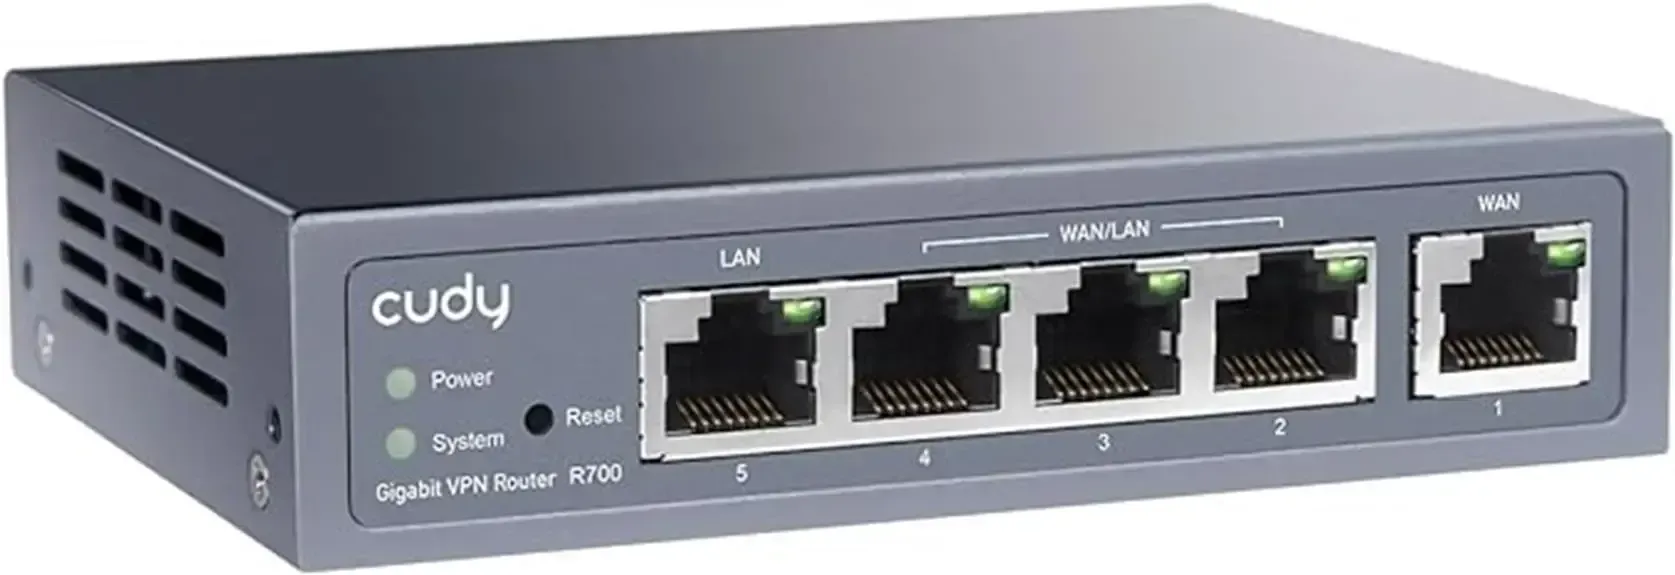 high speed secure network solution